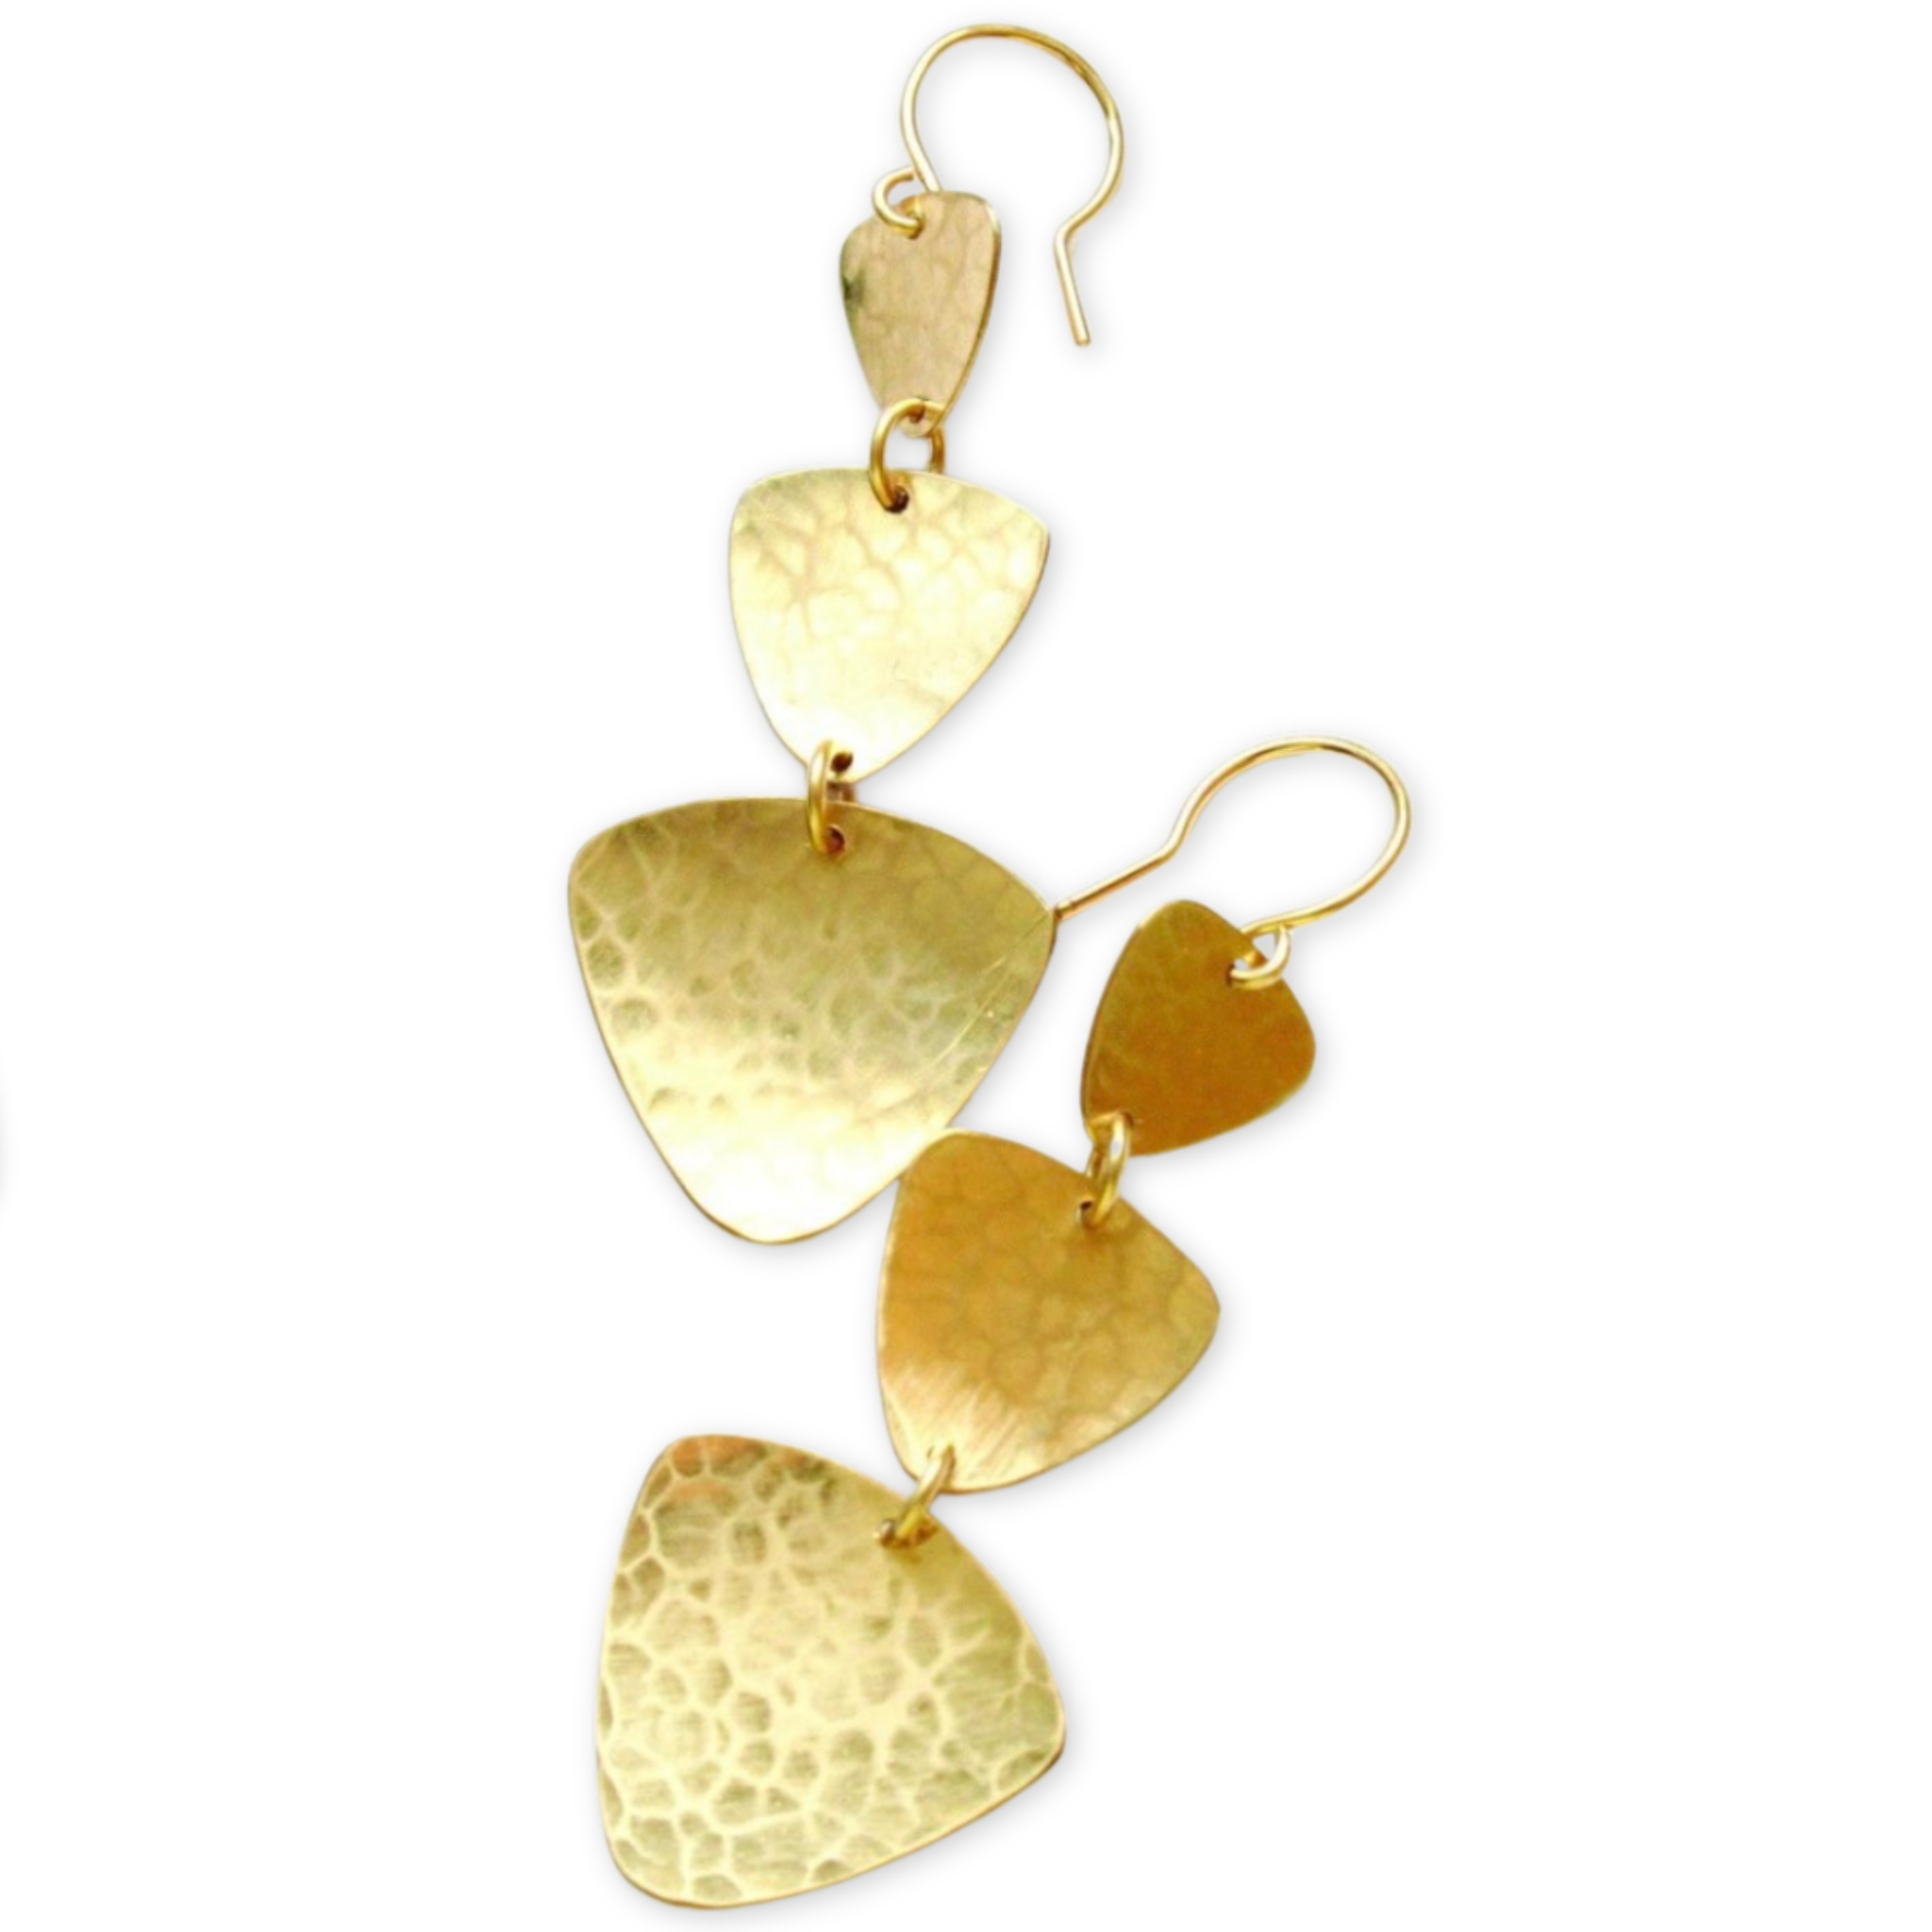 dangling earrings with three cascading rounded triangle pendants